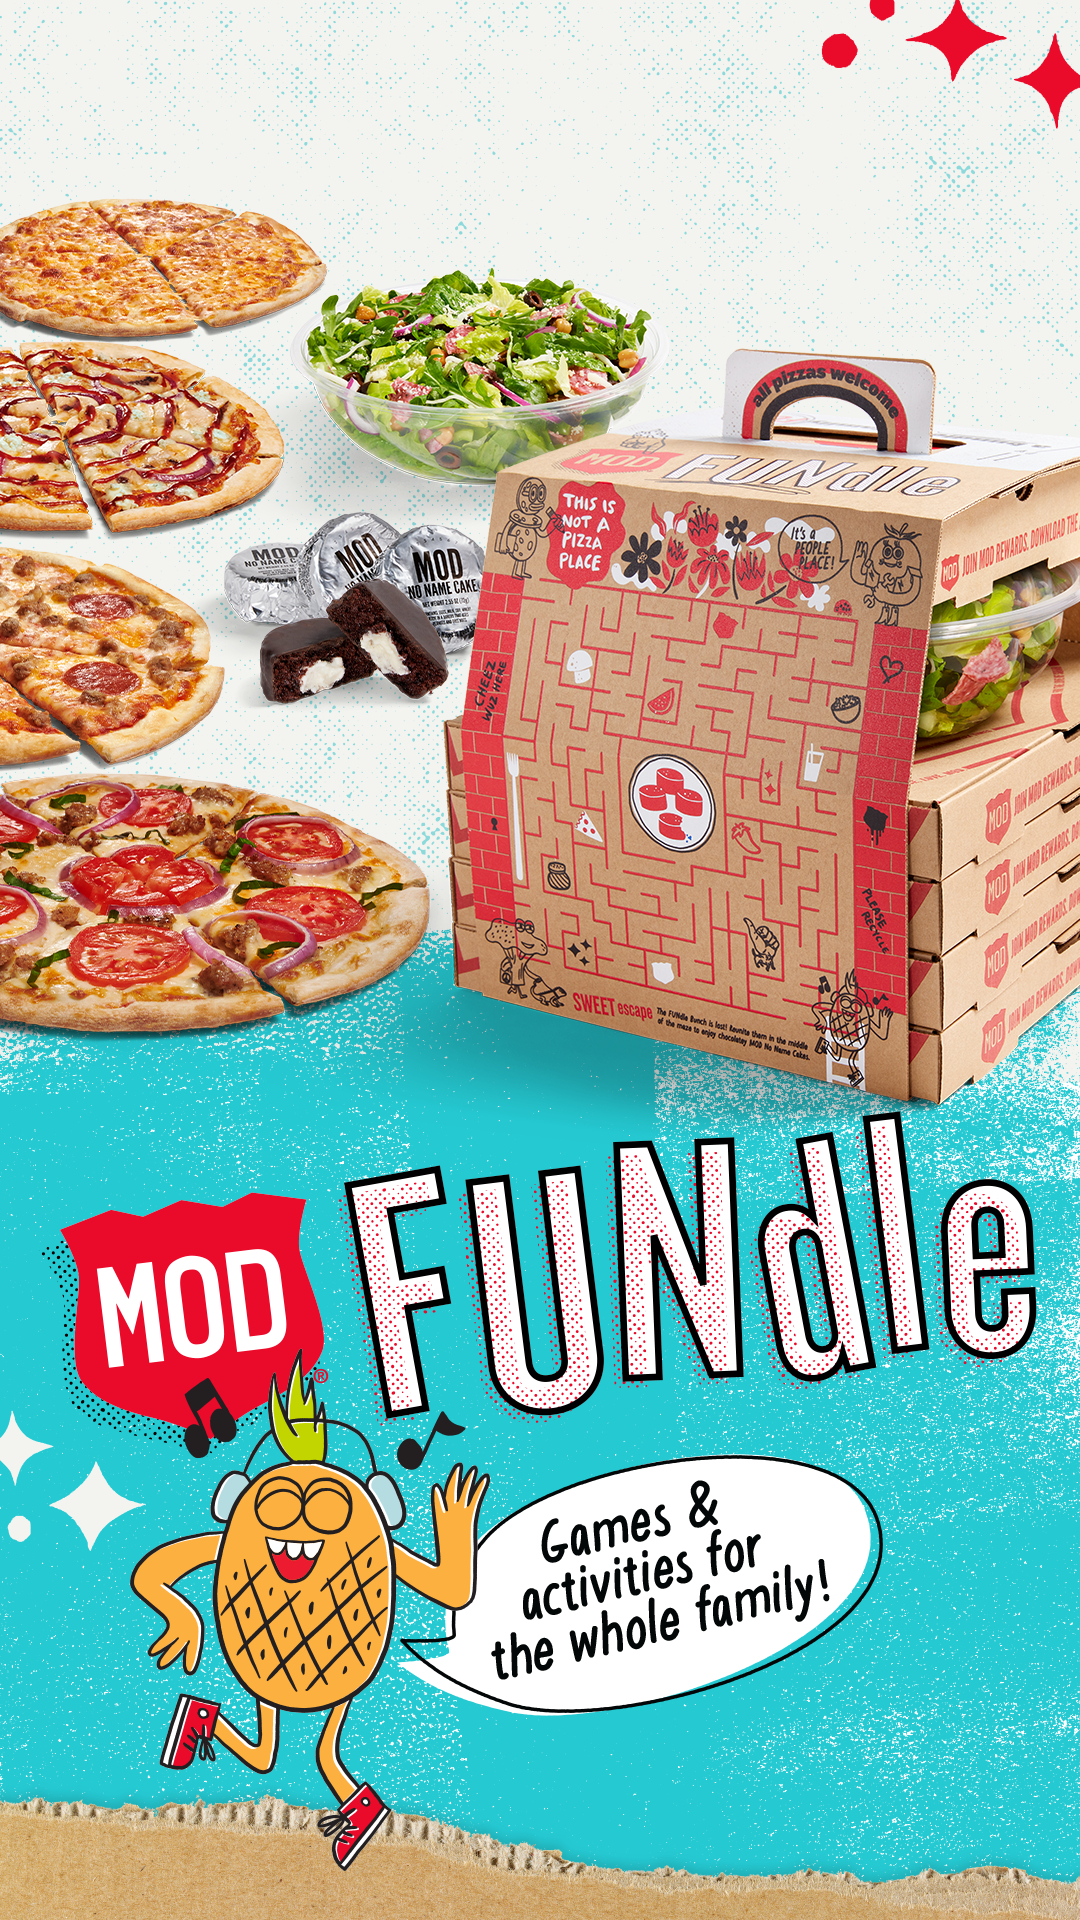 MOD Pizza (@modpizza) • Instagram photos and videos